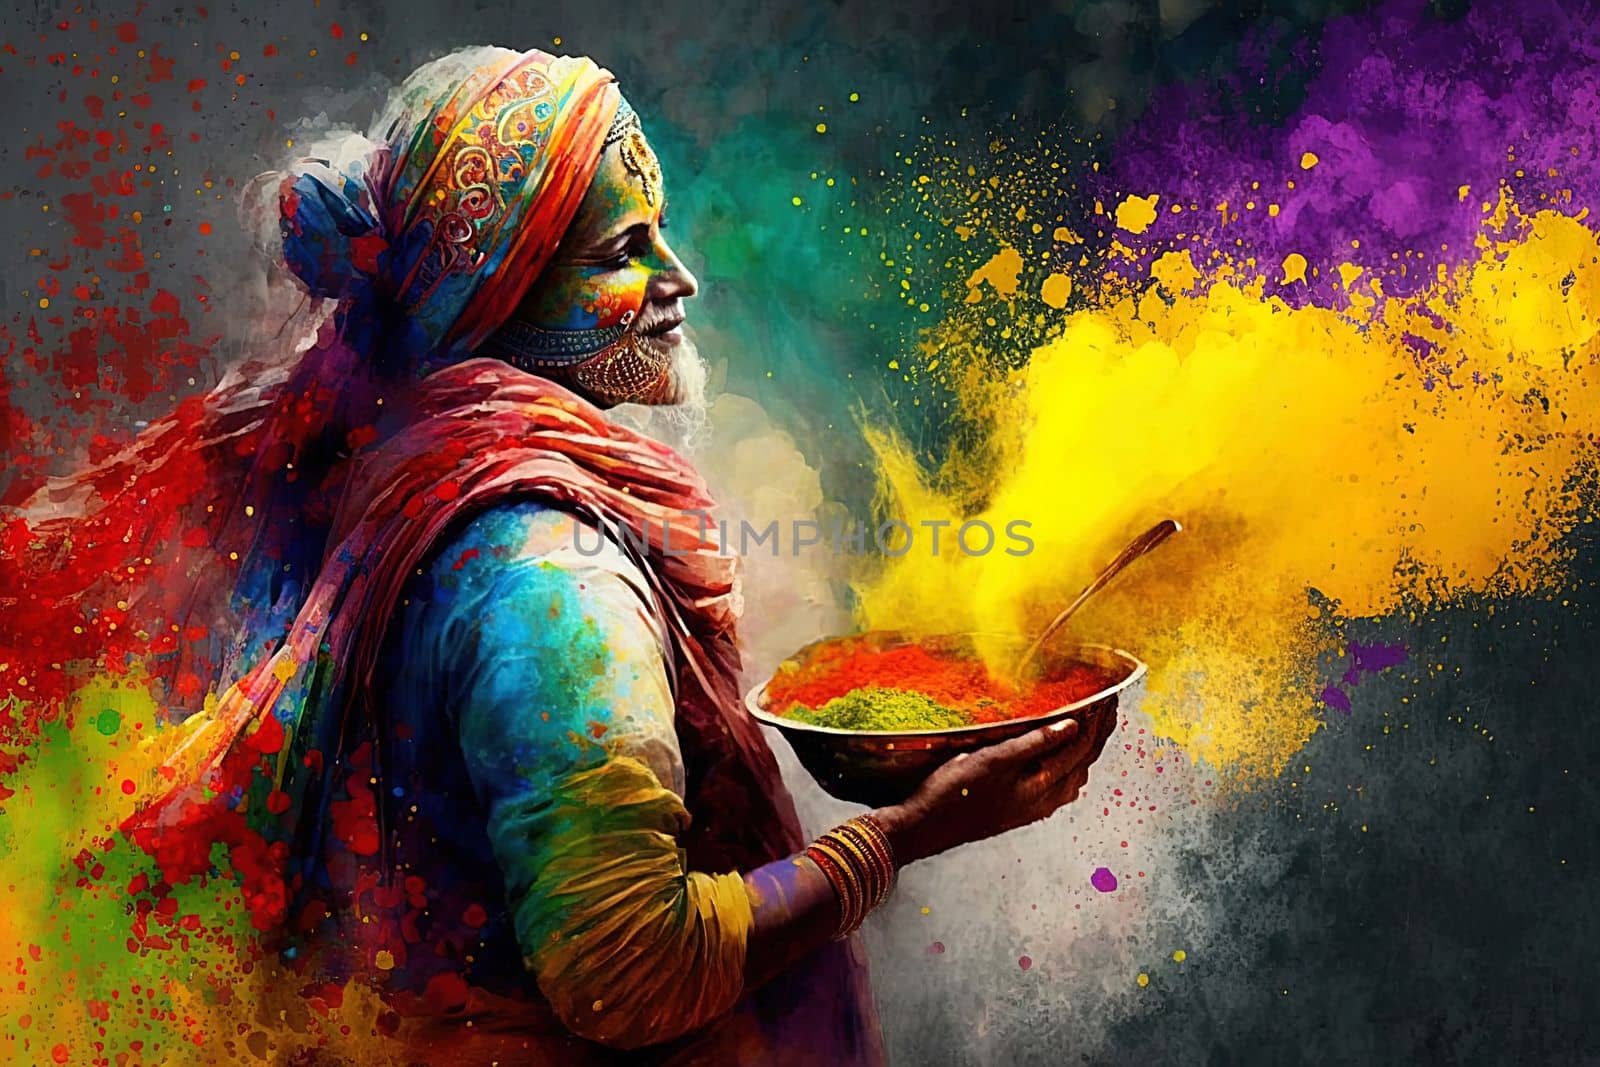 A man sprays paint in honor of the Holi holiday by Dustick